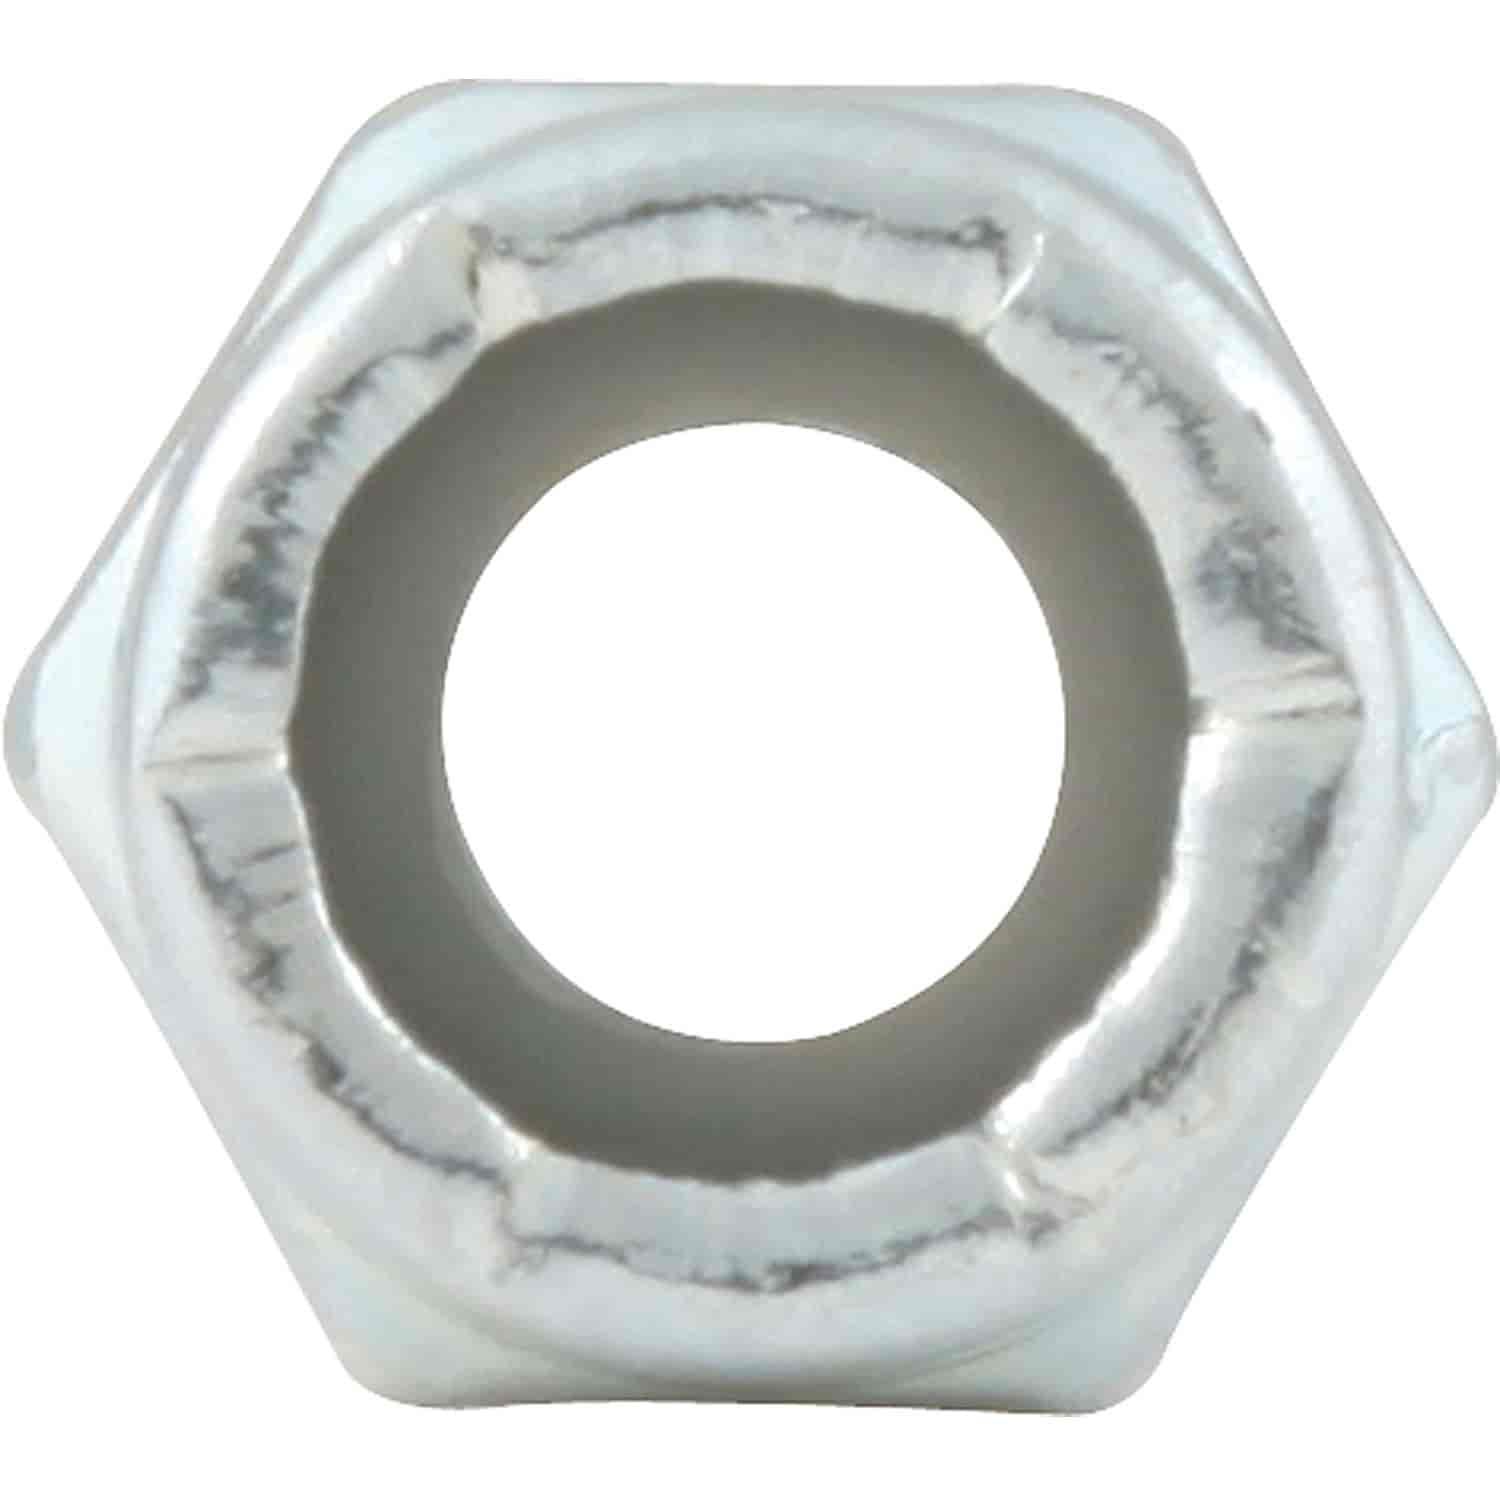 Coarse Thread Hex Nuts With Nylon Inserts 1/4"-20